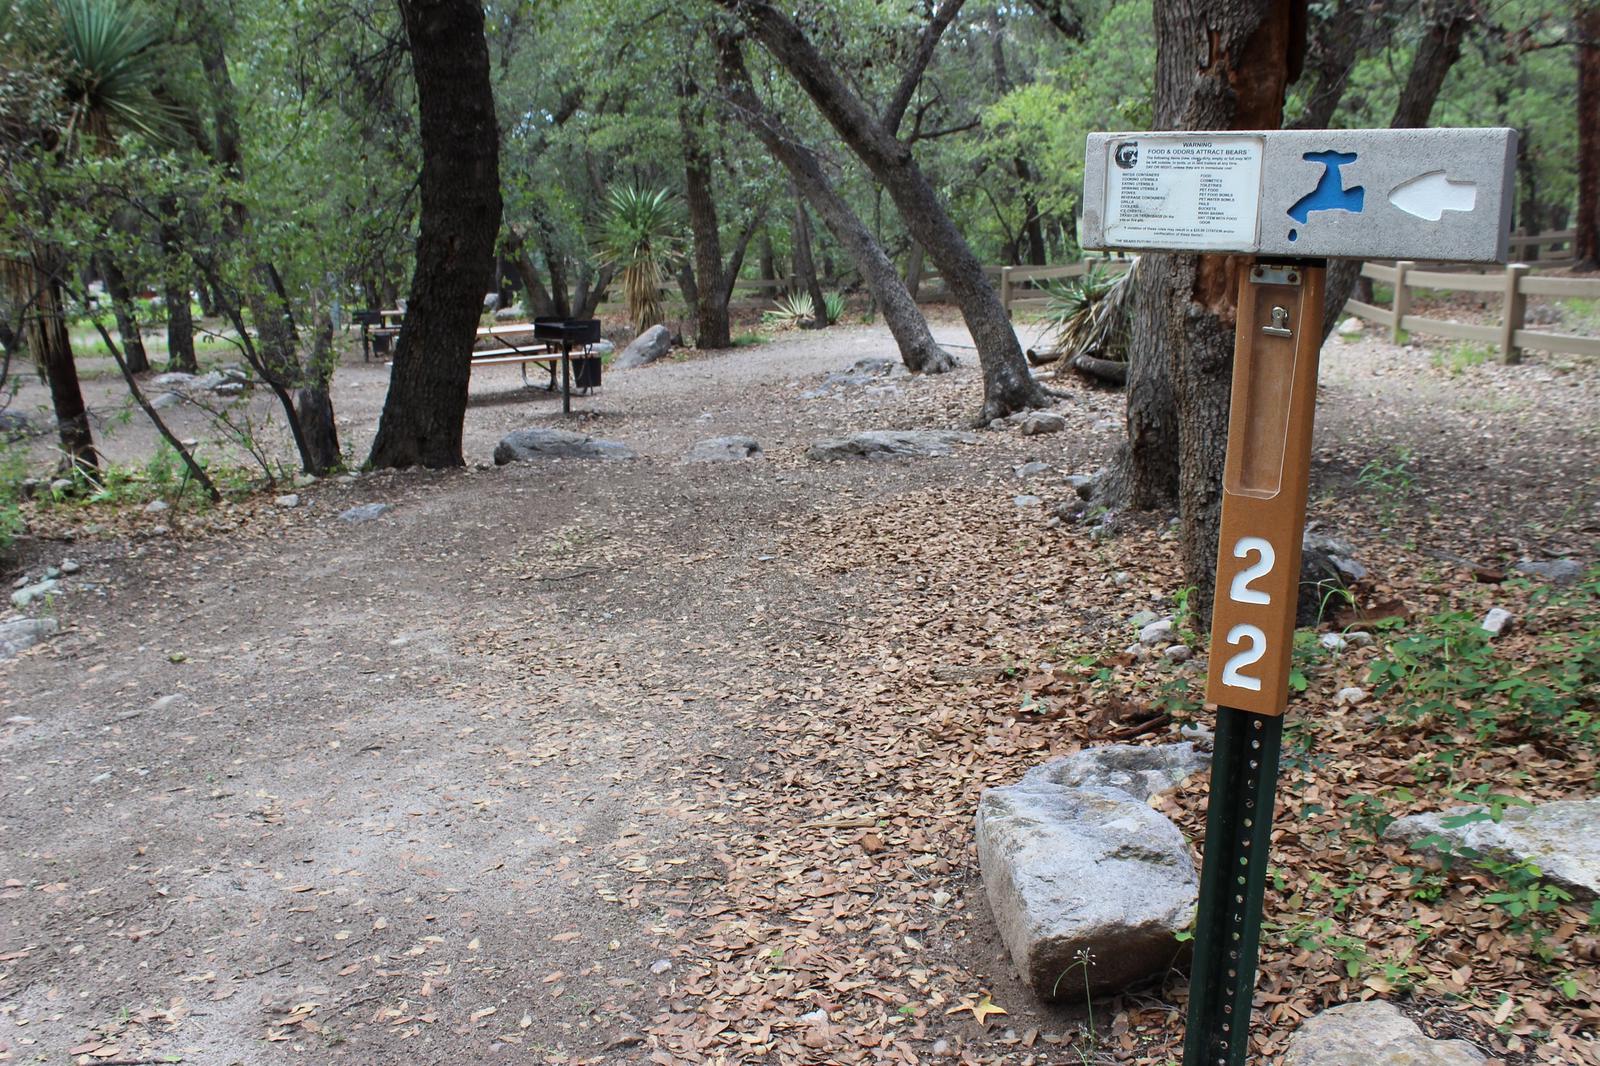 Campsite #22 is very close to #21 and best for tents or pickup campers.Campsite #22